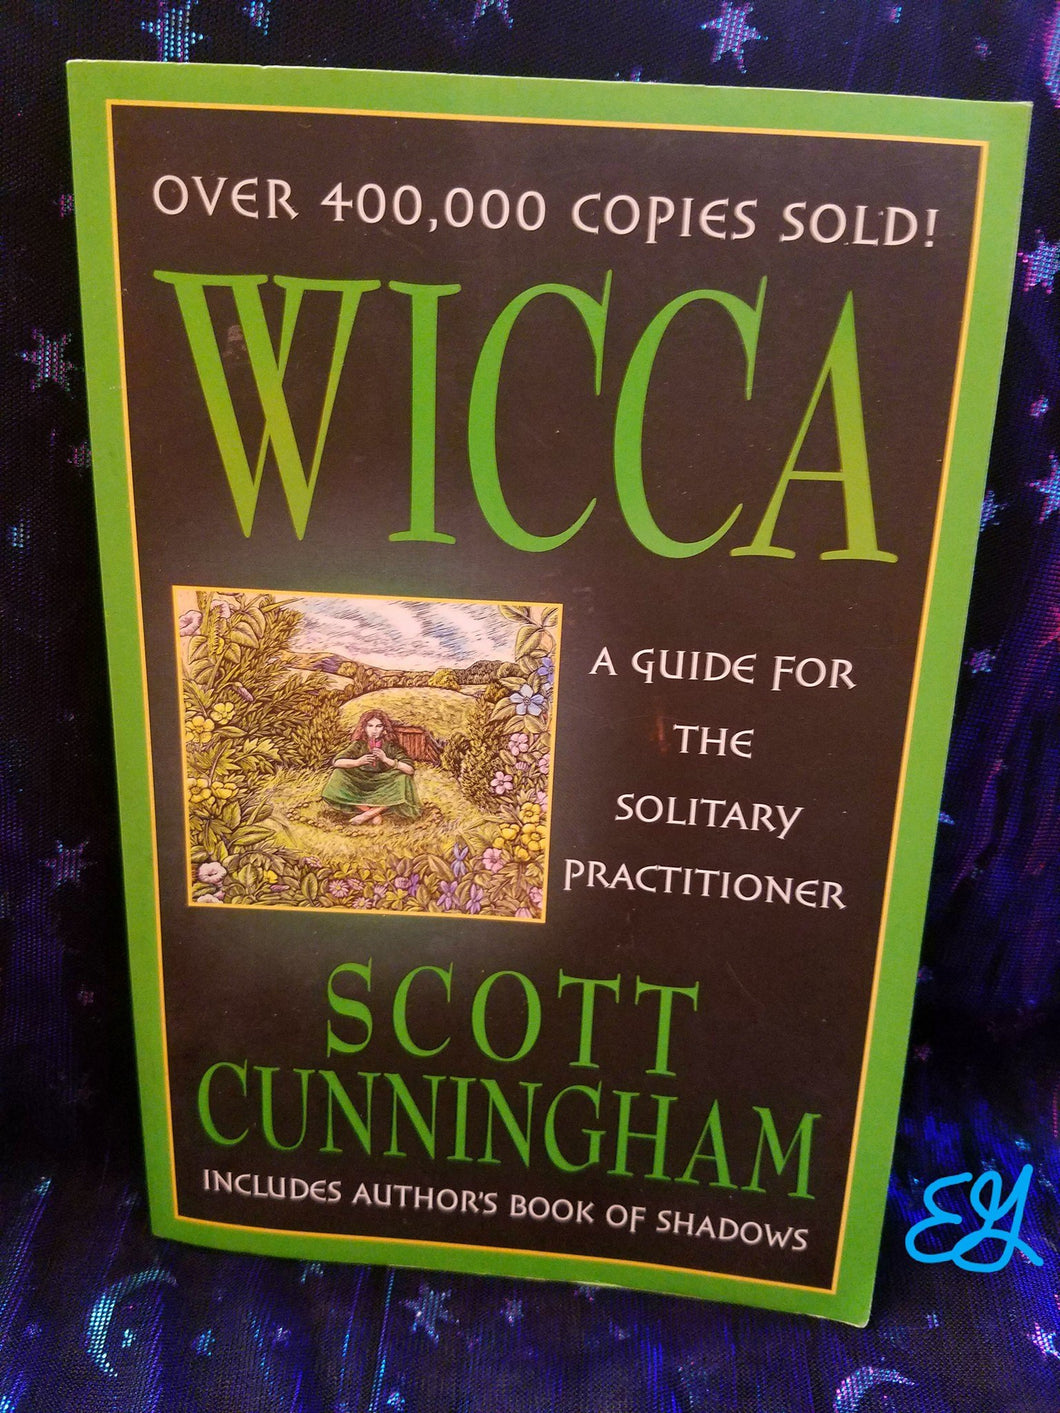 Wicca: Guide for the Solitary Practitioner By Scott Cunningham